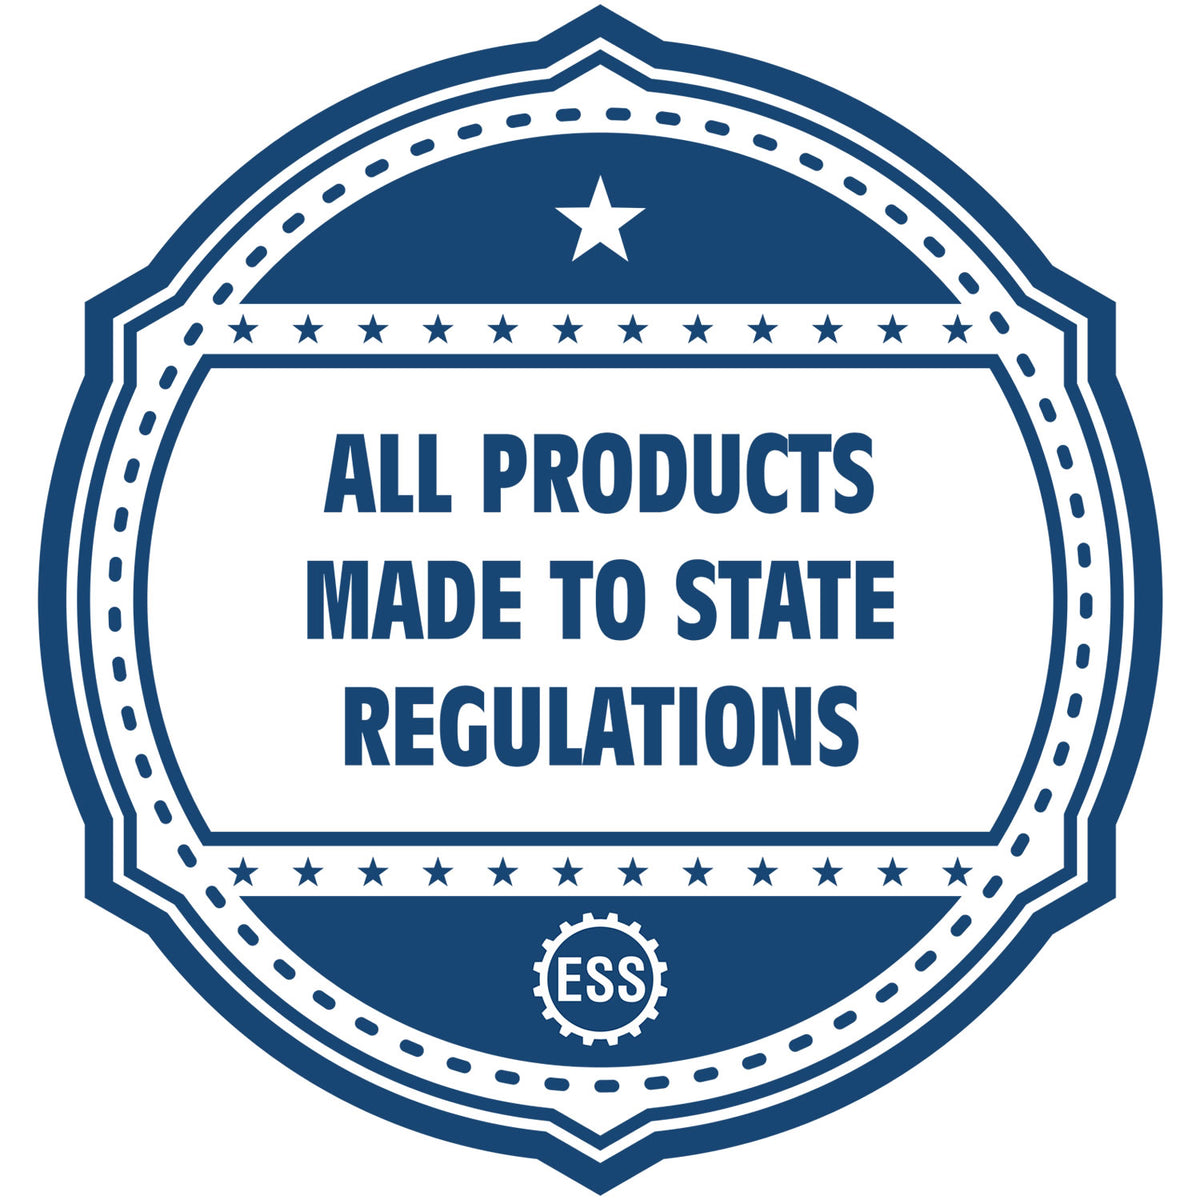 An icon or badge element for the Iowa Desk Architect Embossing Seal showing that this product is made in compliance with state regulations.